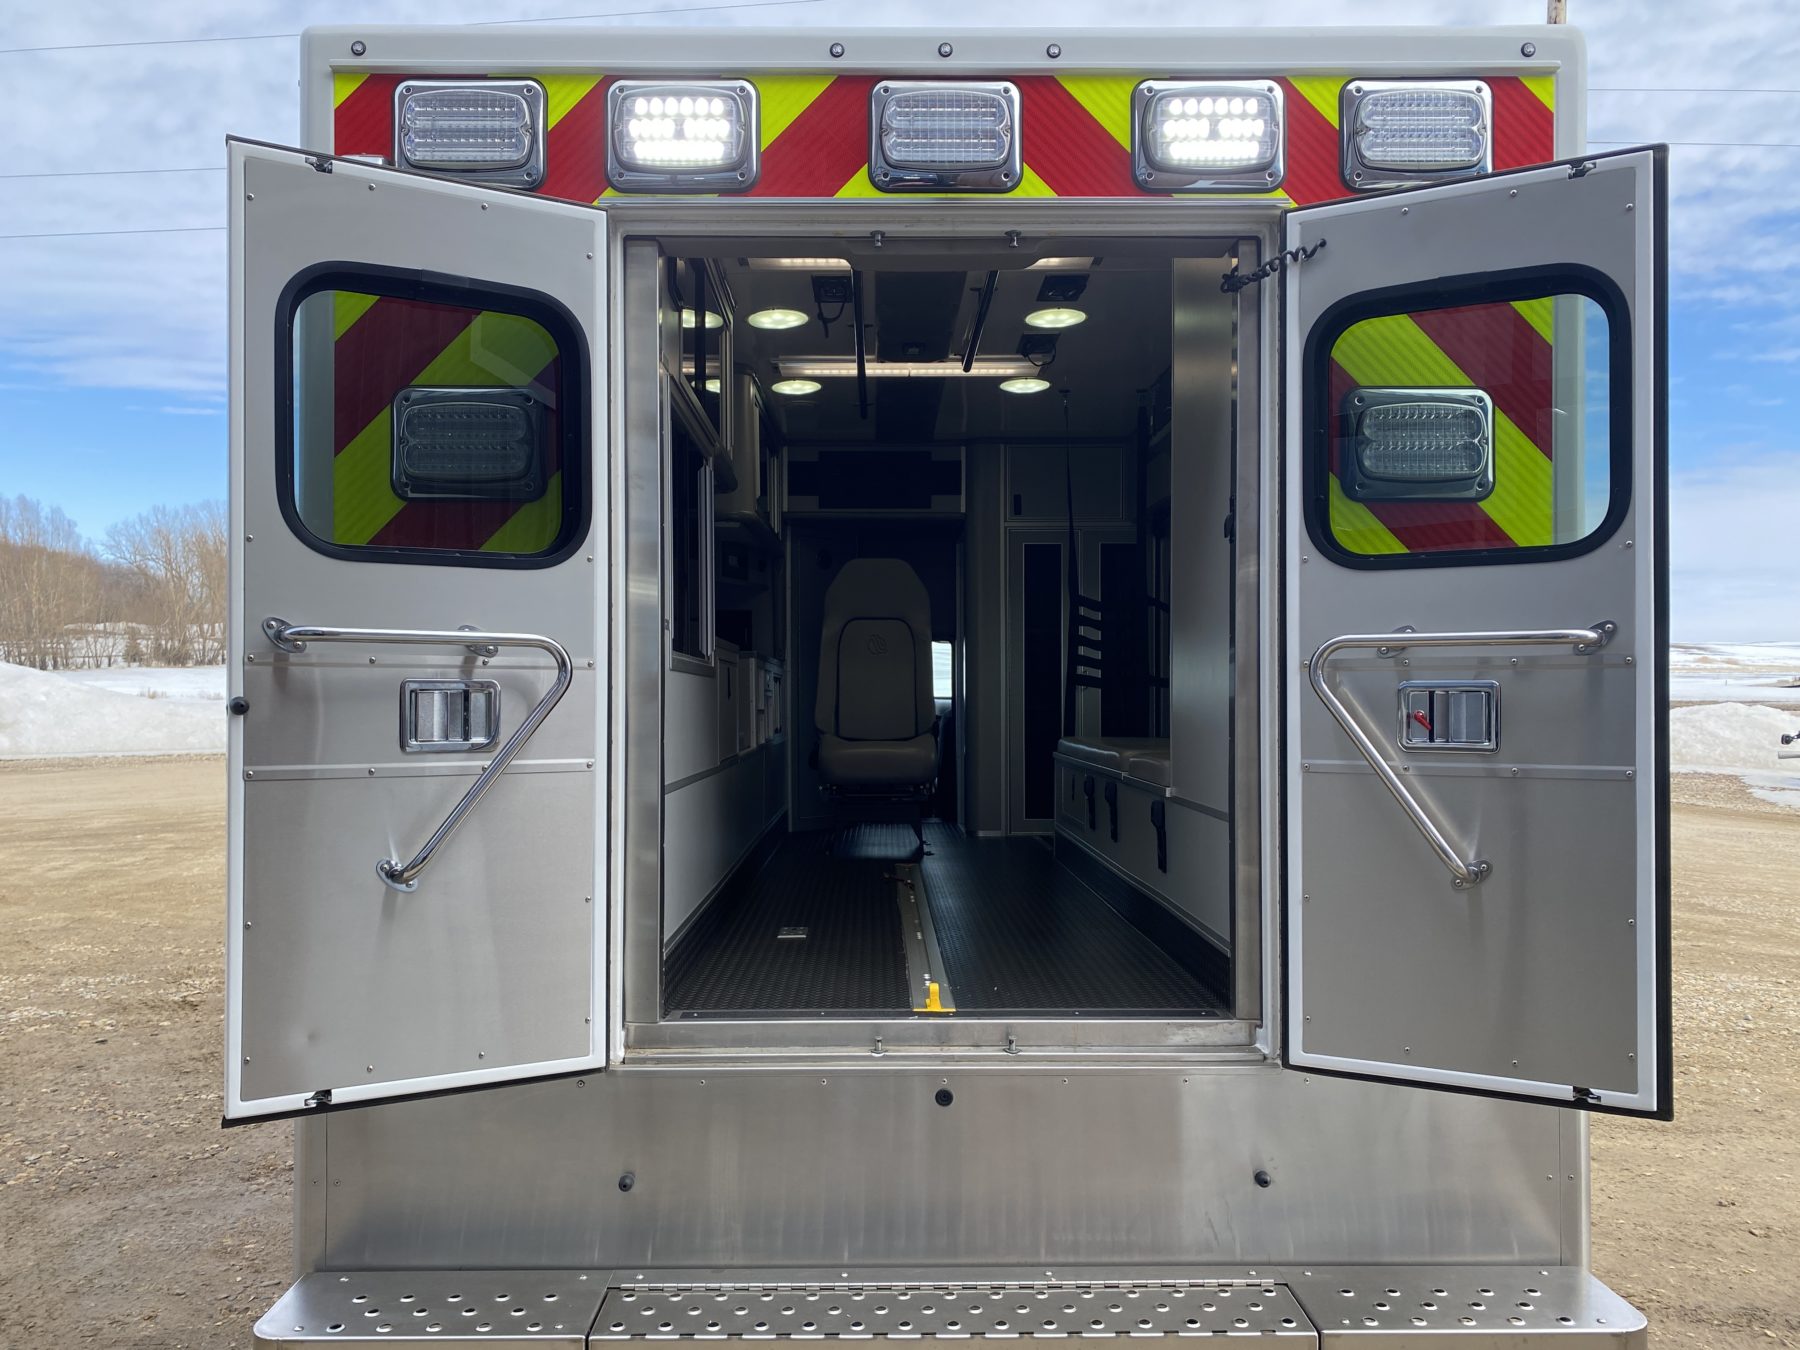 2020 Ram 4500 4x4 Heavy Duty Ambulance For Sale – Picture 9